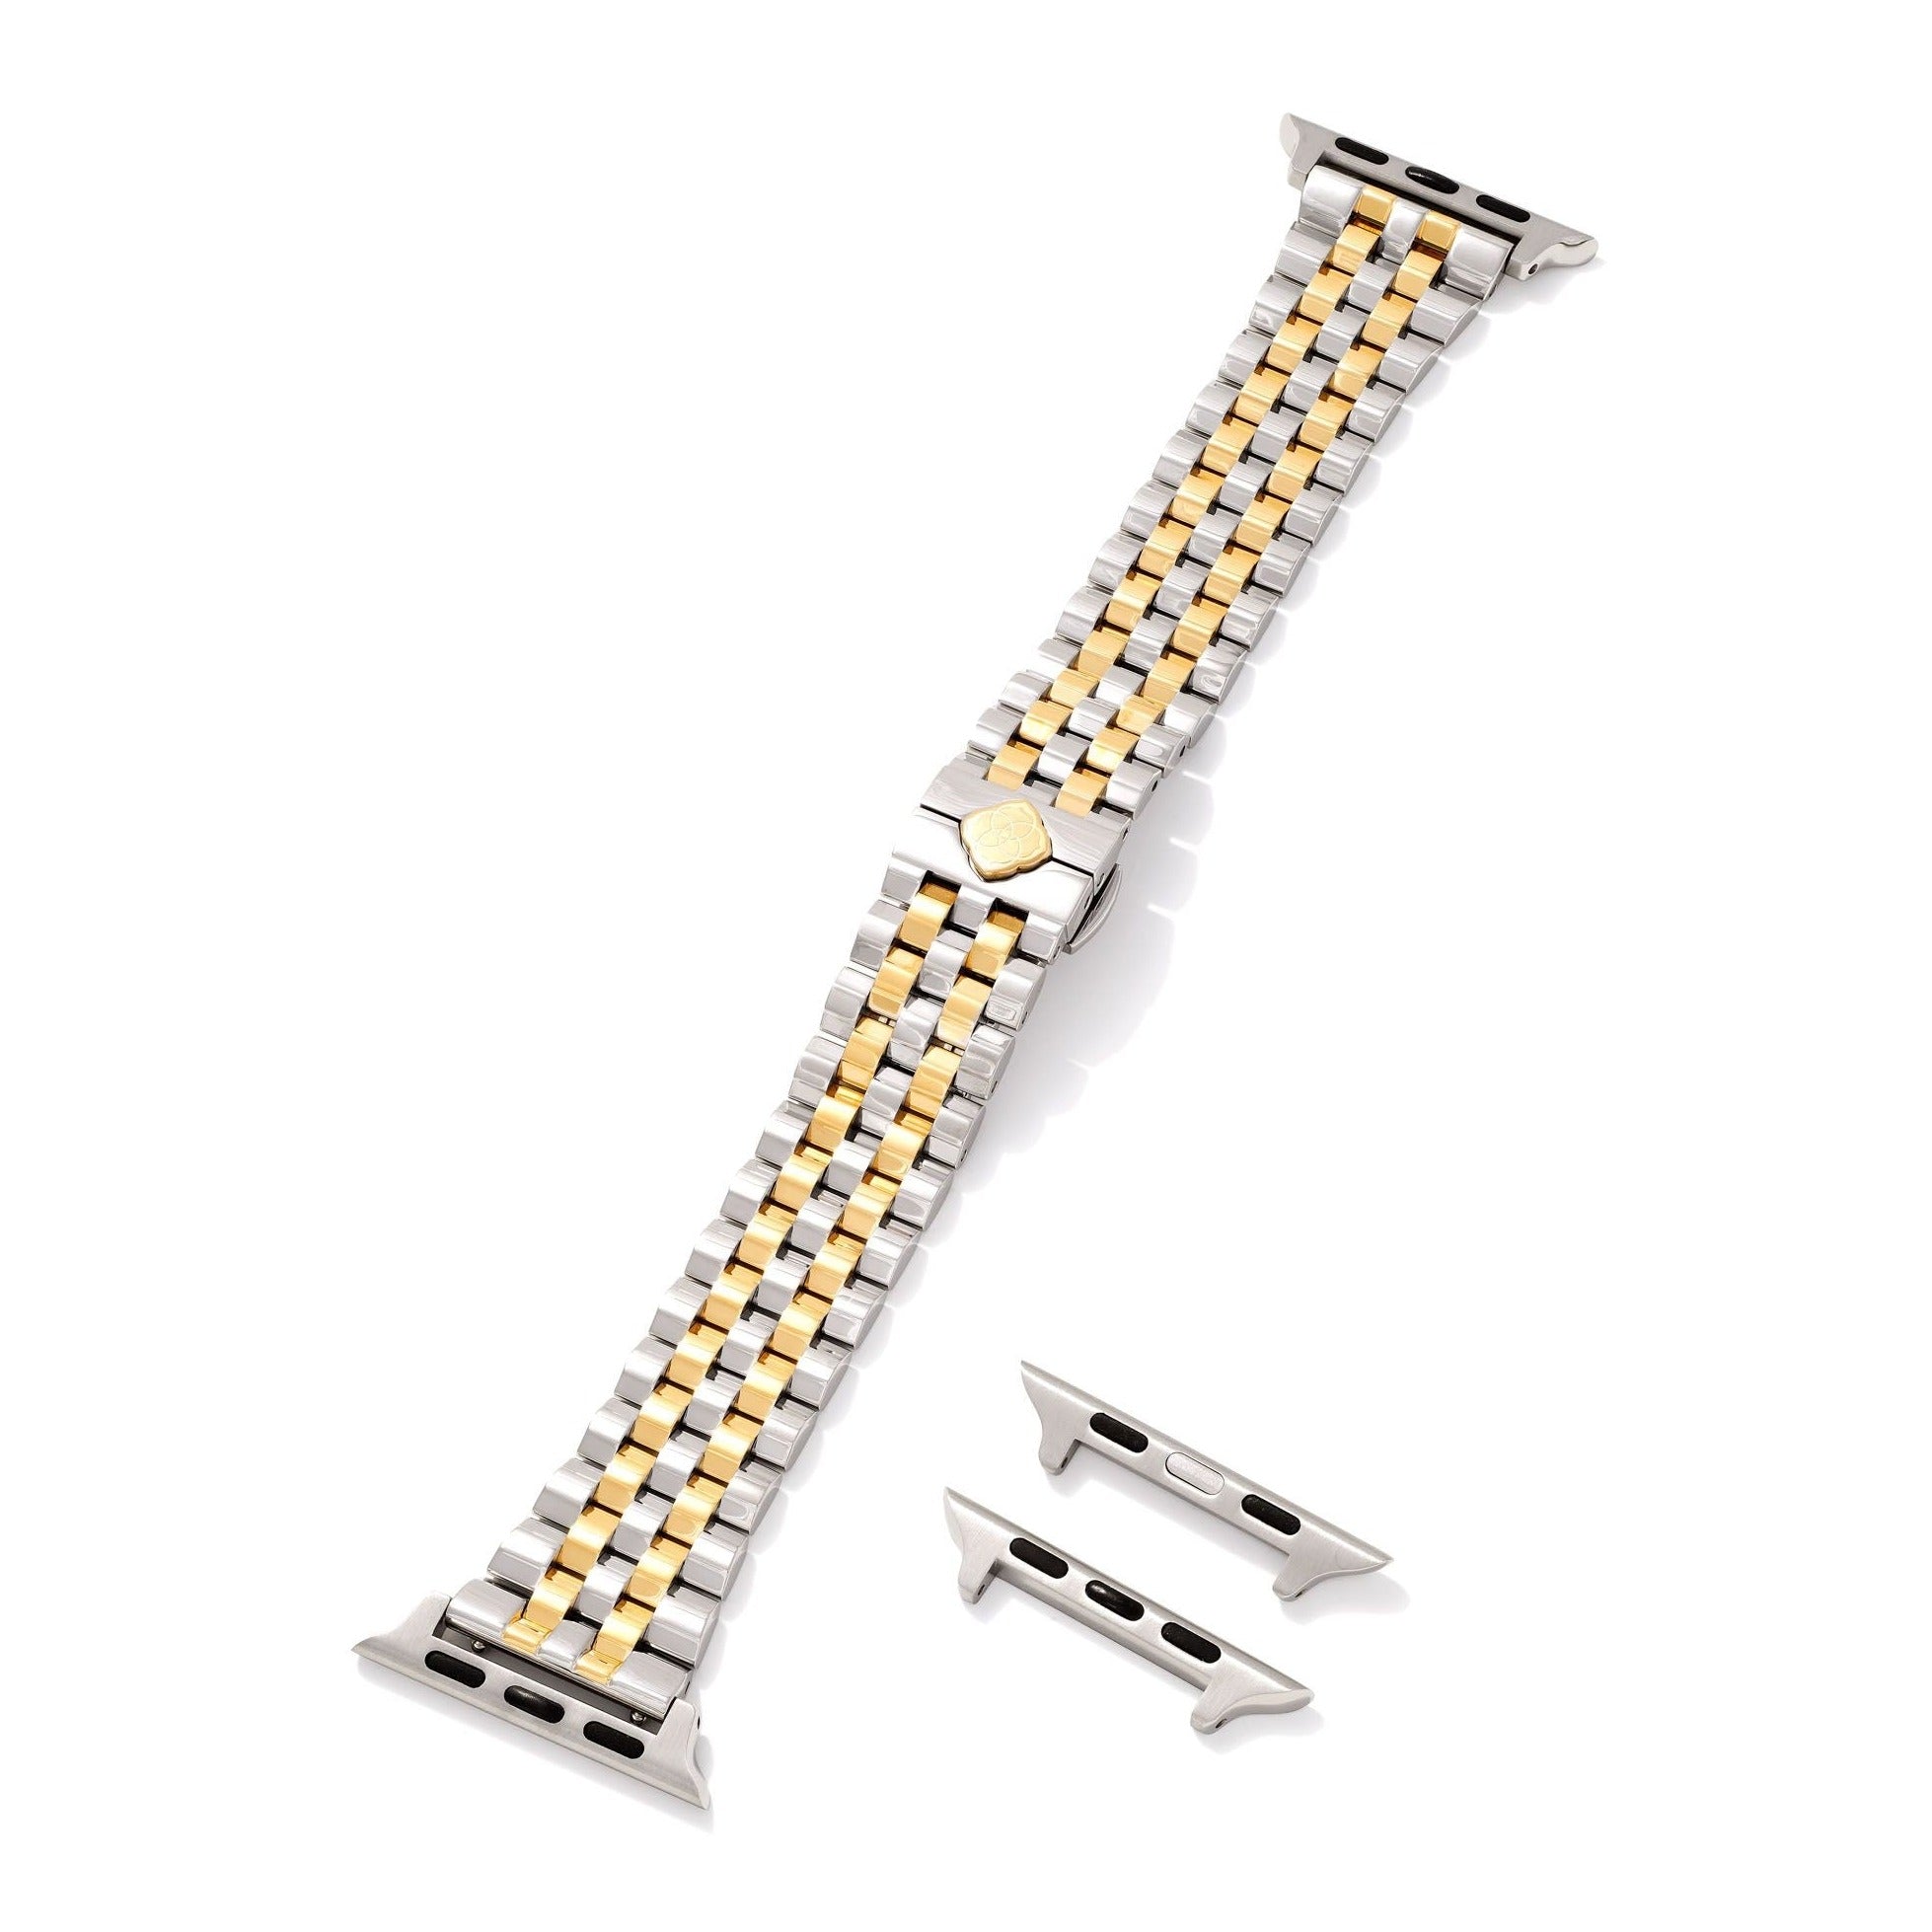 Kendra Scott | Alex 5 Link Watch Band in Two Tone Stainless Steel